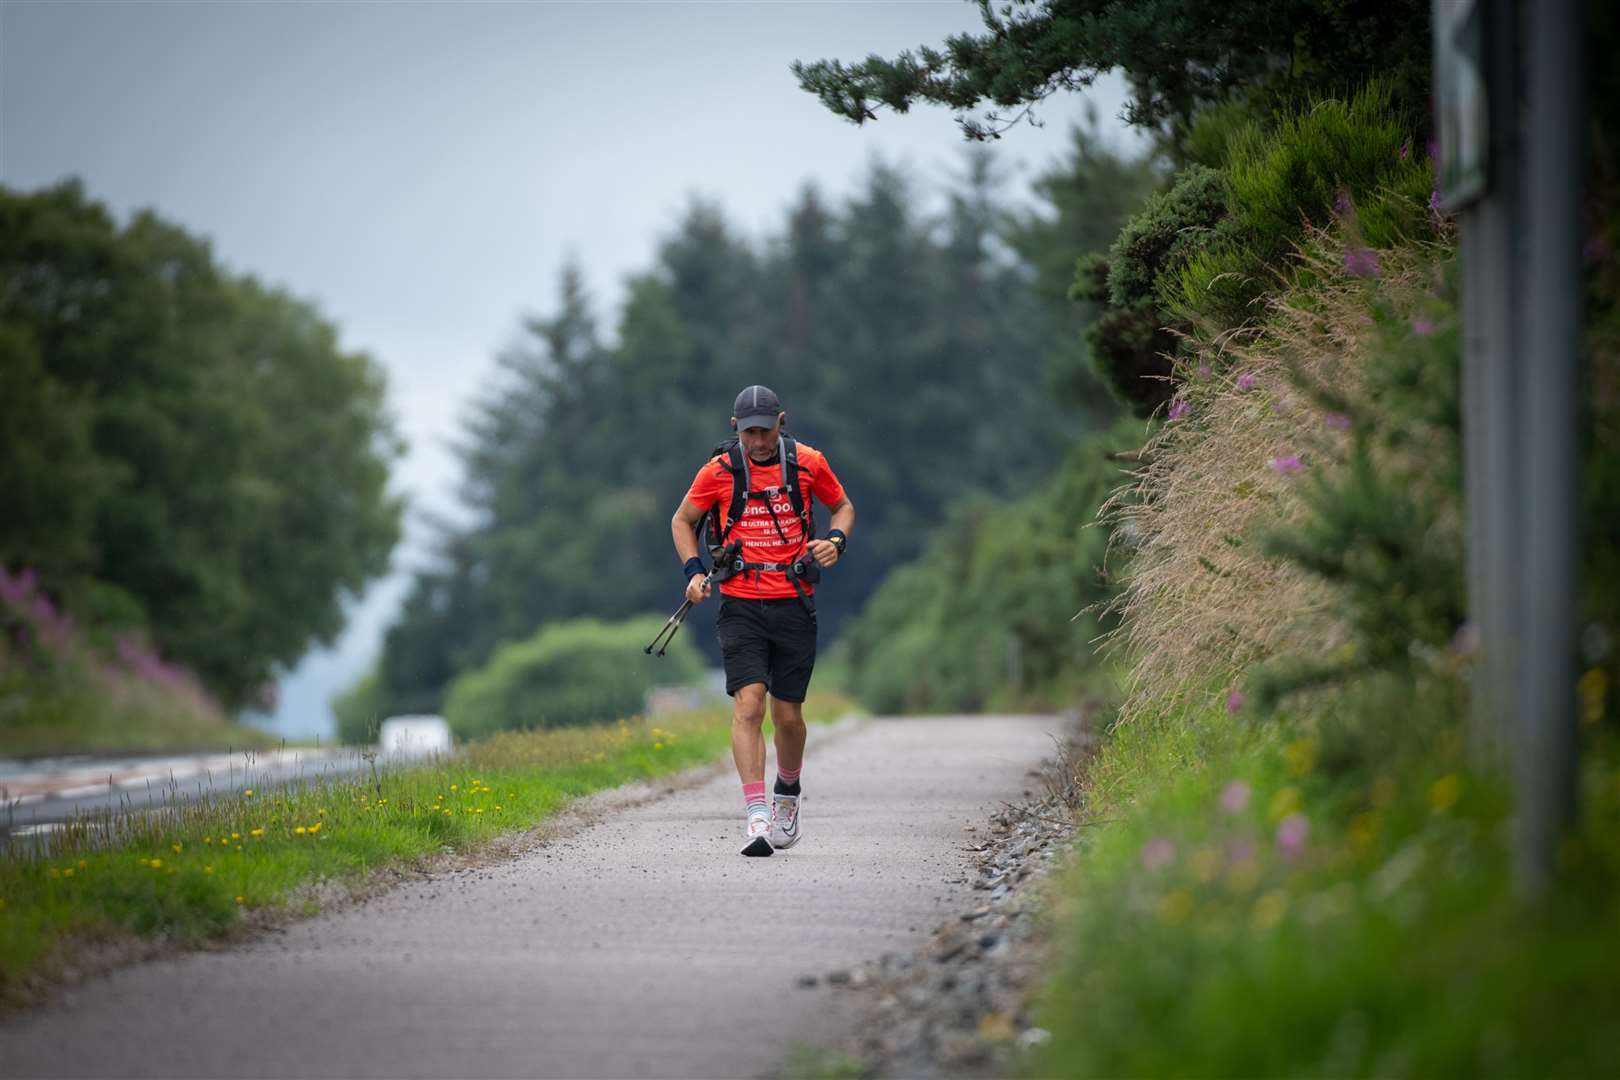 Approaching the Kessock Bridge on his homeward leg. Nicky Forster ran the NC500 unsupported to raise funds for Mental Health UK. Picture: Callum Mackay.